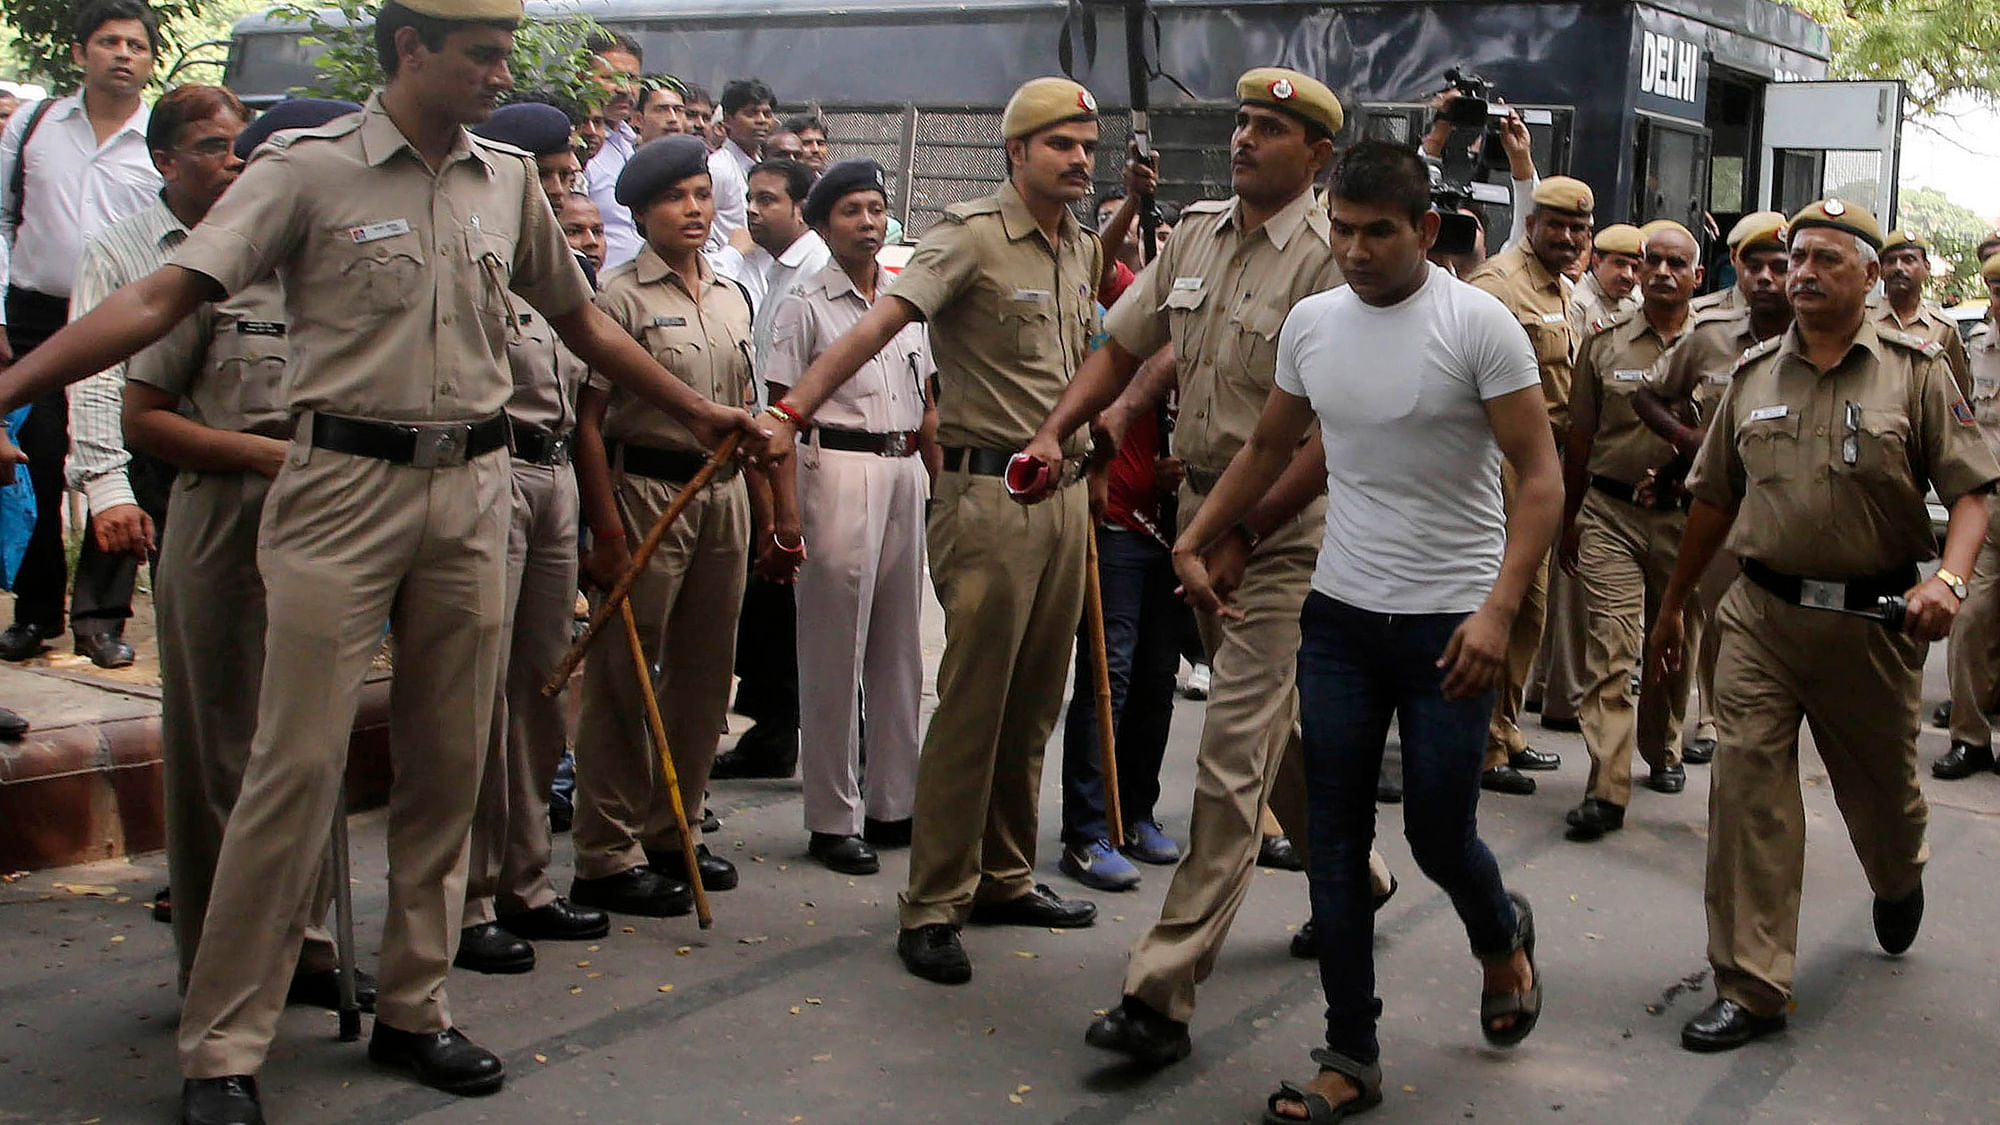 

Vinay Sharma (wearing white T-shirt), one of the death row convicts in Nirbhaya case has been sentenced to 10 years in a separate robbery case. (Photo: Reuters)